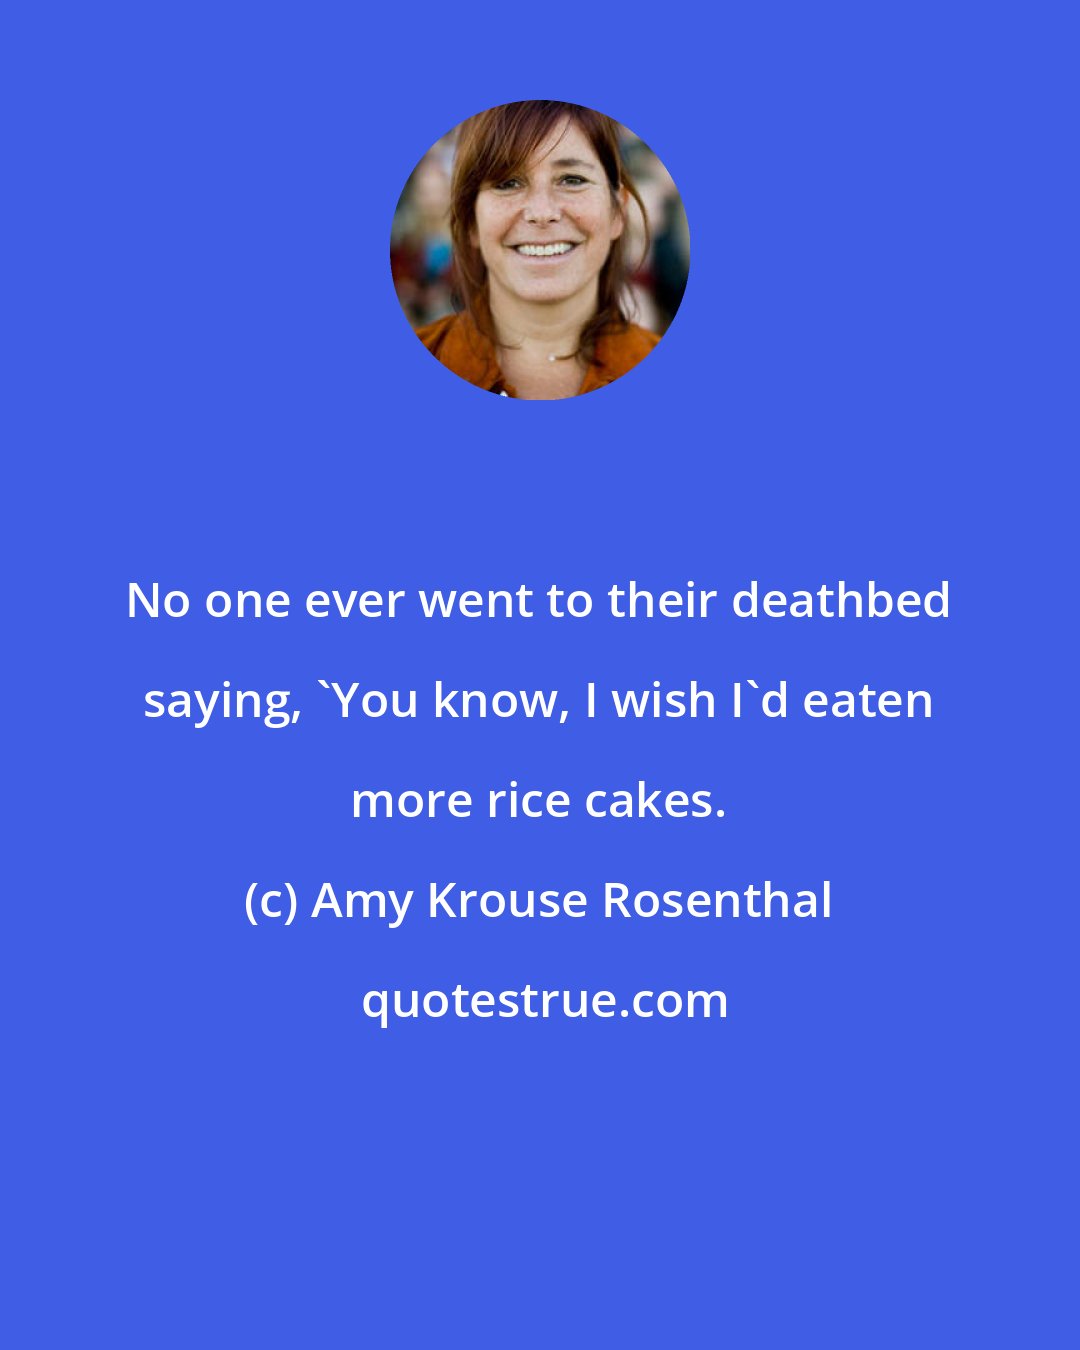 Amy Krouse Rosenthal: No one ever went to their deathbed saying, 'You know, I wish I'd eaten more rice cakes.